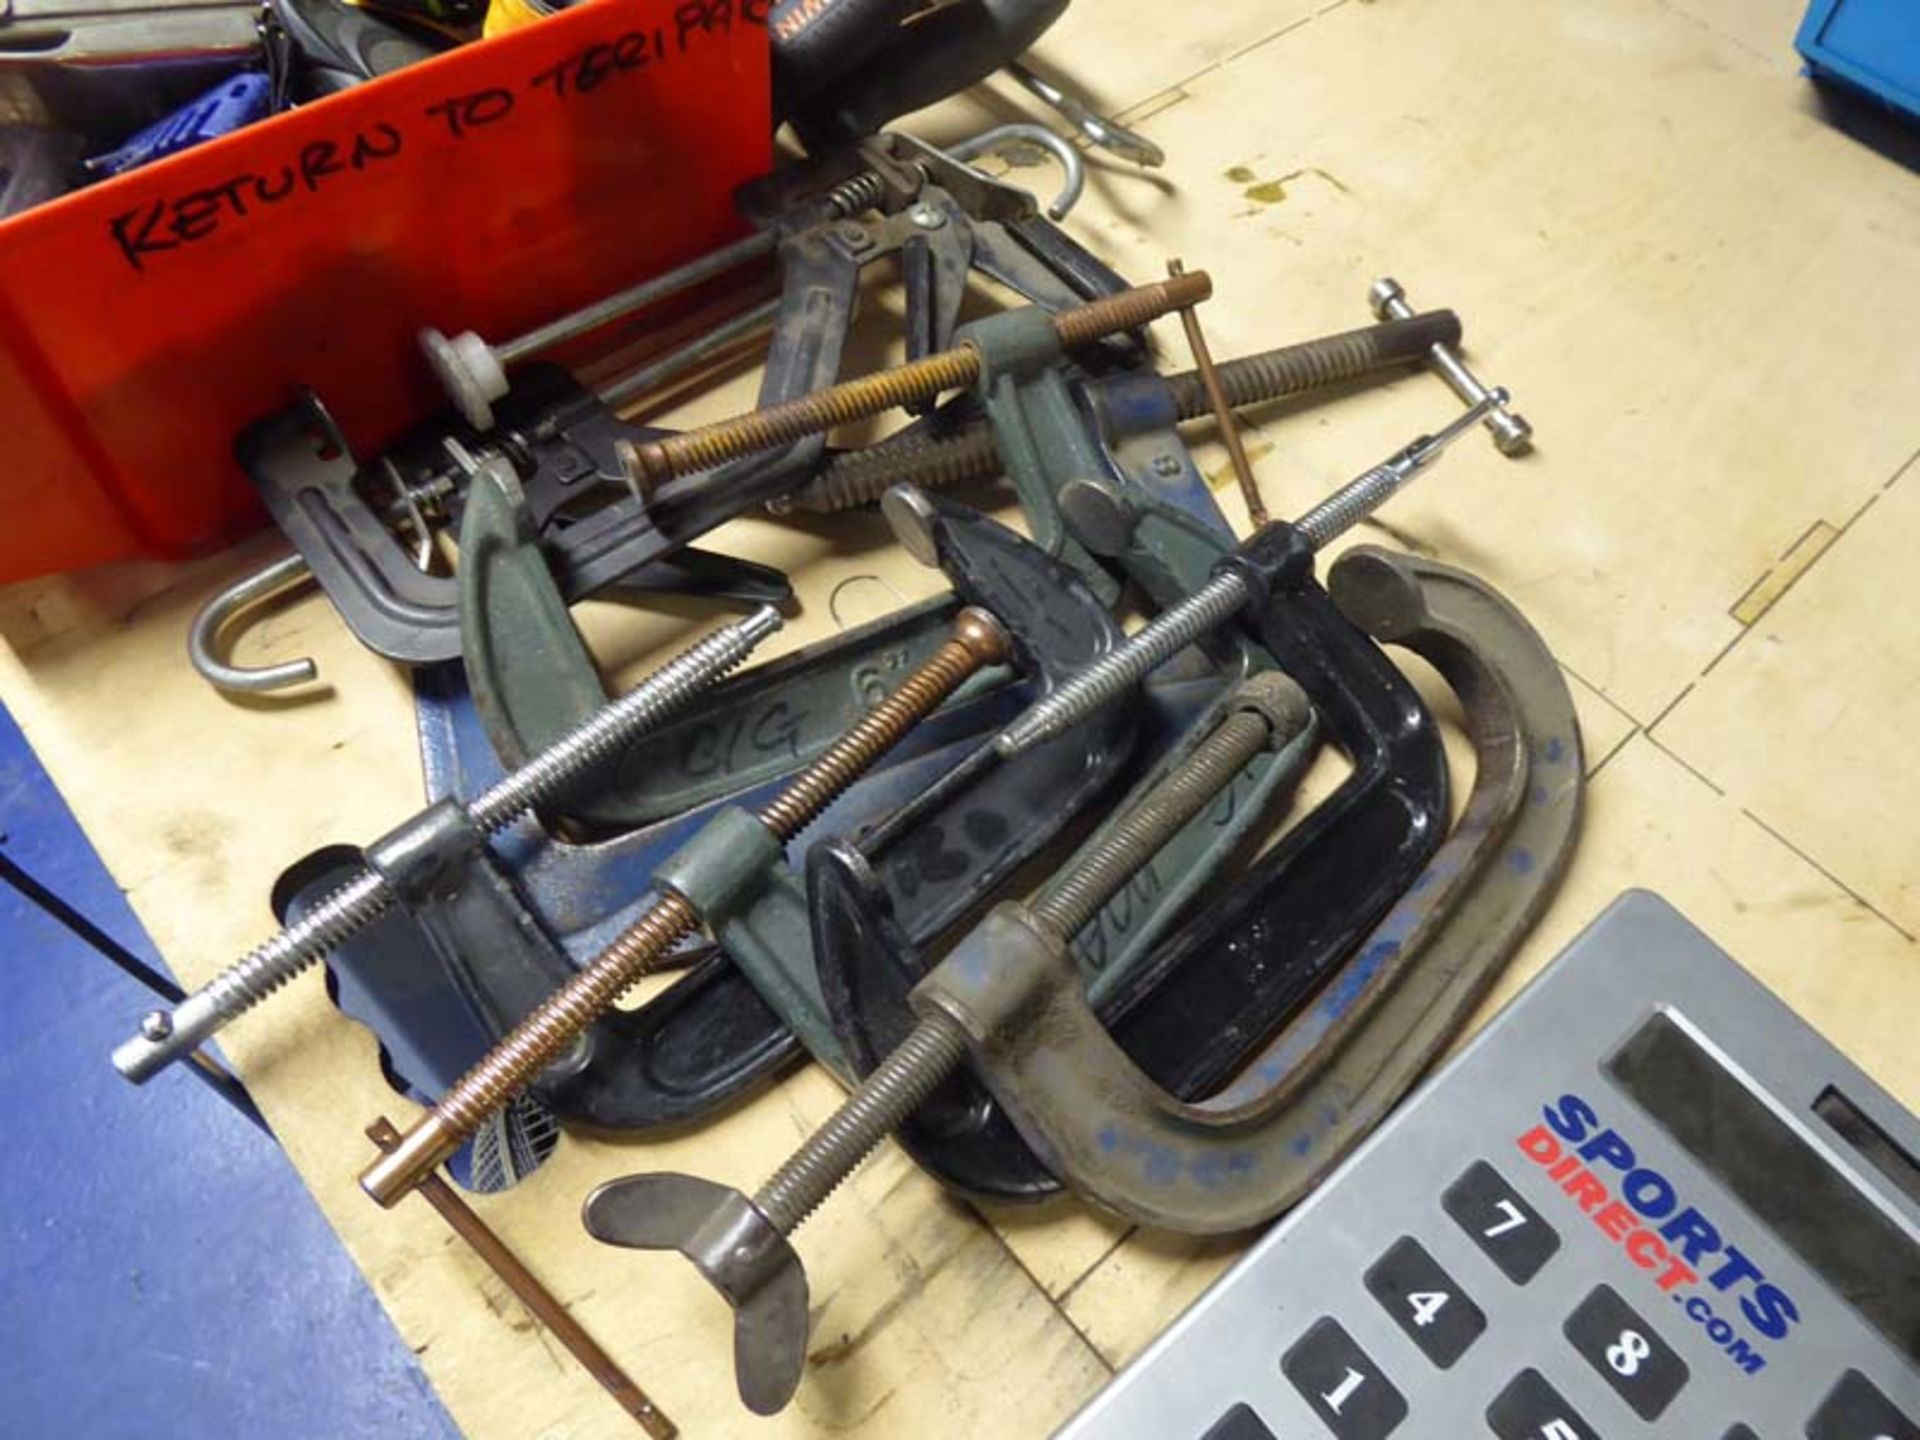 Range of hand held tools, G clamps, nuts, bolts, fixings etc - Image 2 of 6